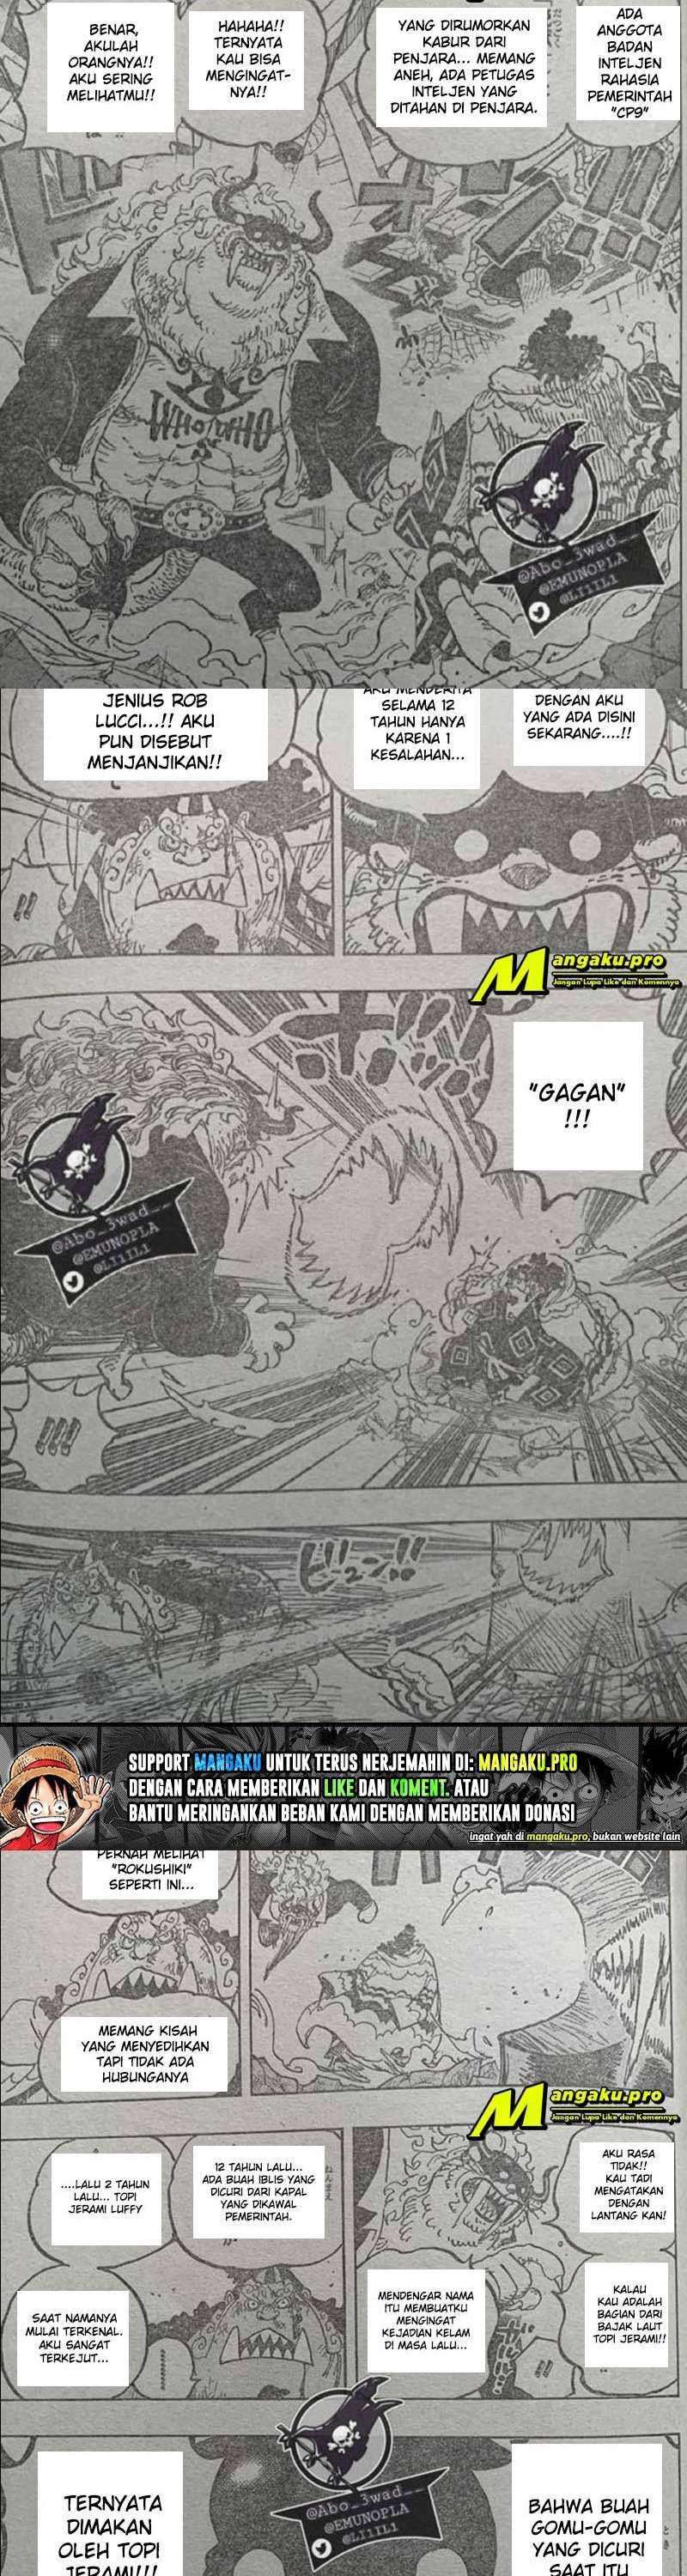 One Piece Chapter 1017 Lq - 61